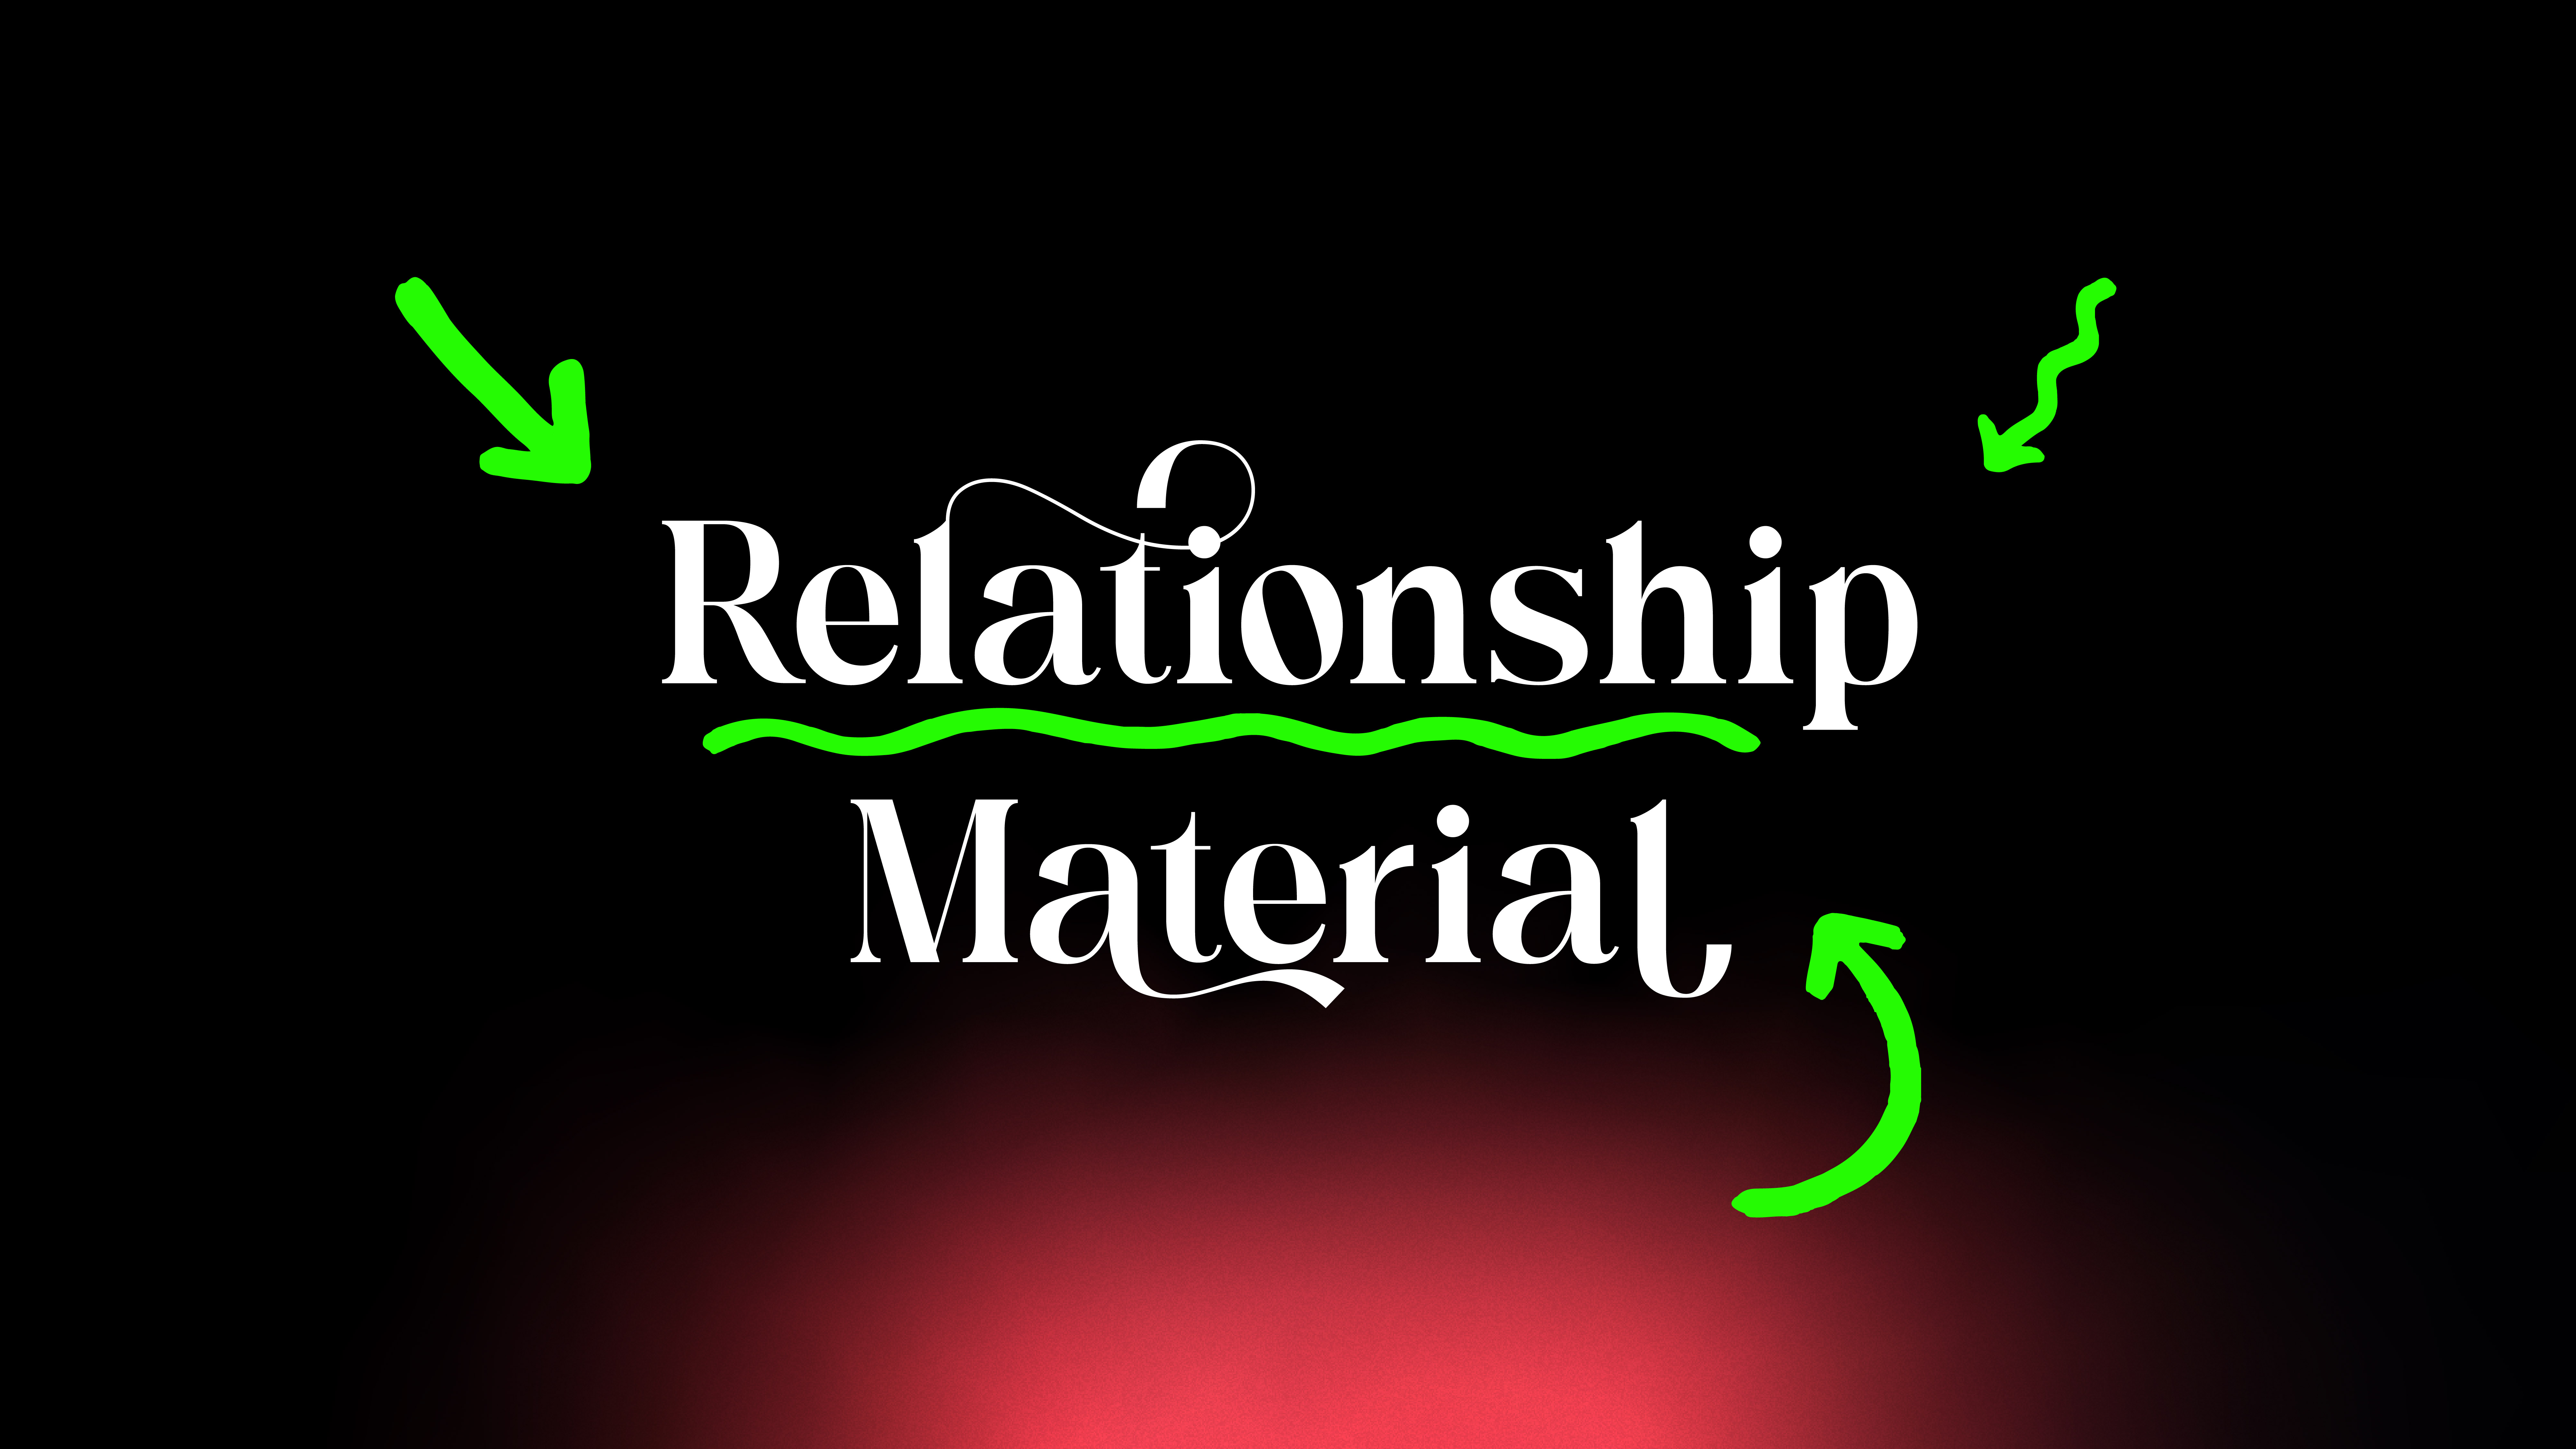 Graphic Communication work by Dominik Sobolewski, Jessie Kaur, Keiran Oshea, Madelene Rourke showing a D&AD Submission for Do The Green Thing. On a black and red gradient background, the words 'Relationship Material' are set in white decorative font. Relationship is underlined with a neon green wavy line, and neon green arrows point to the whole text.